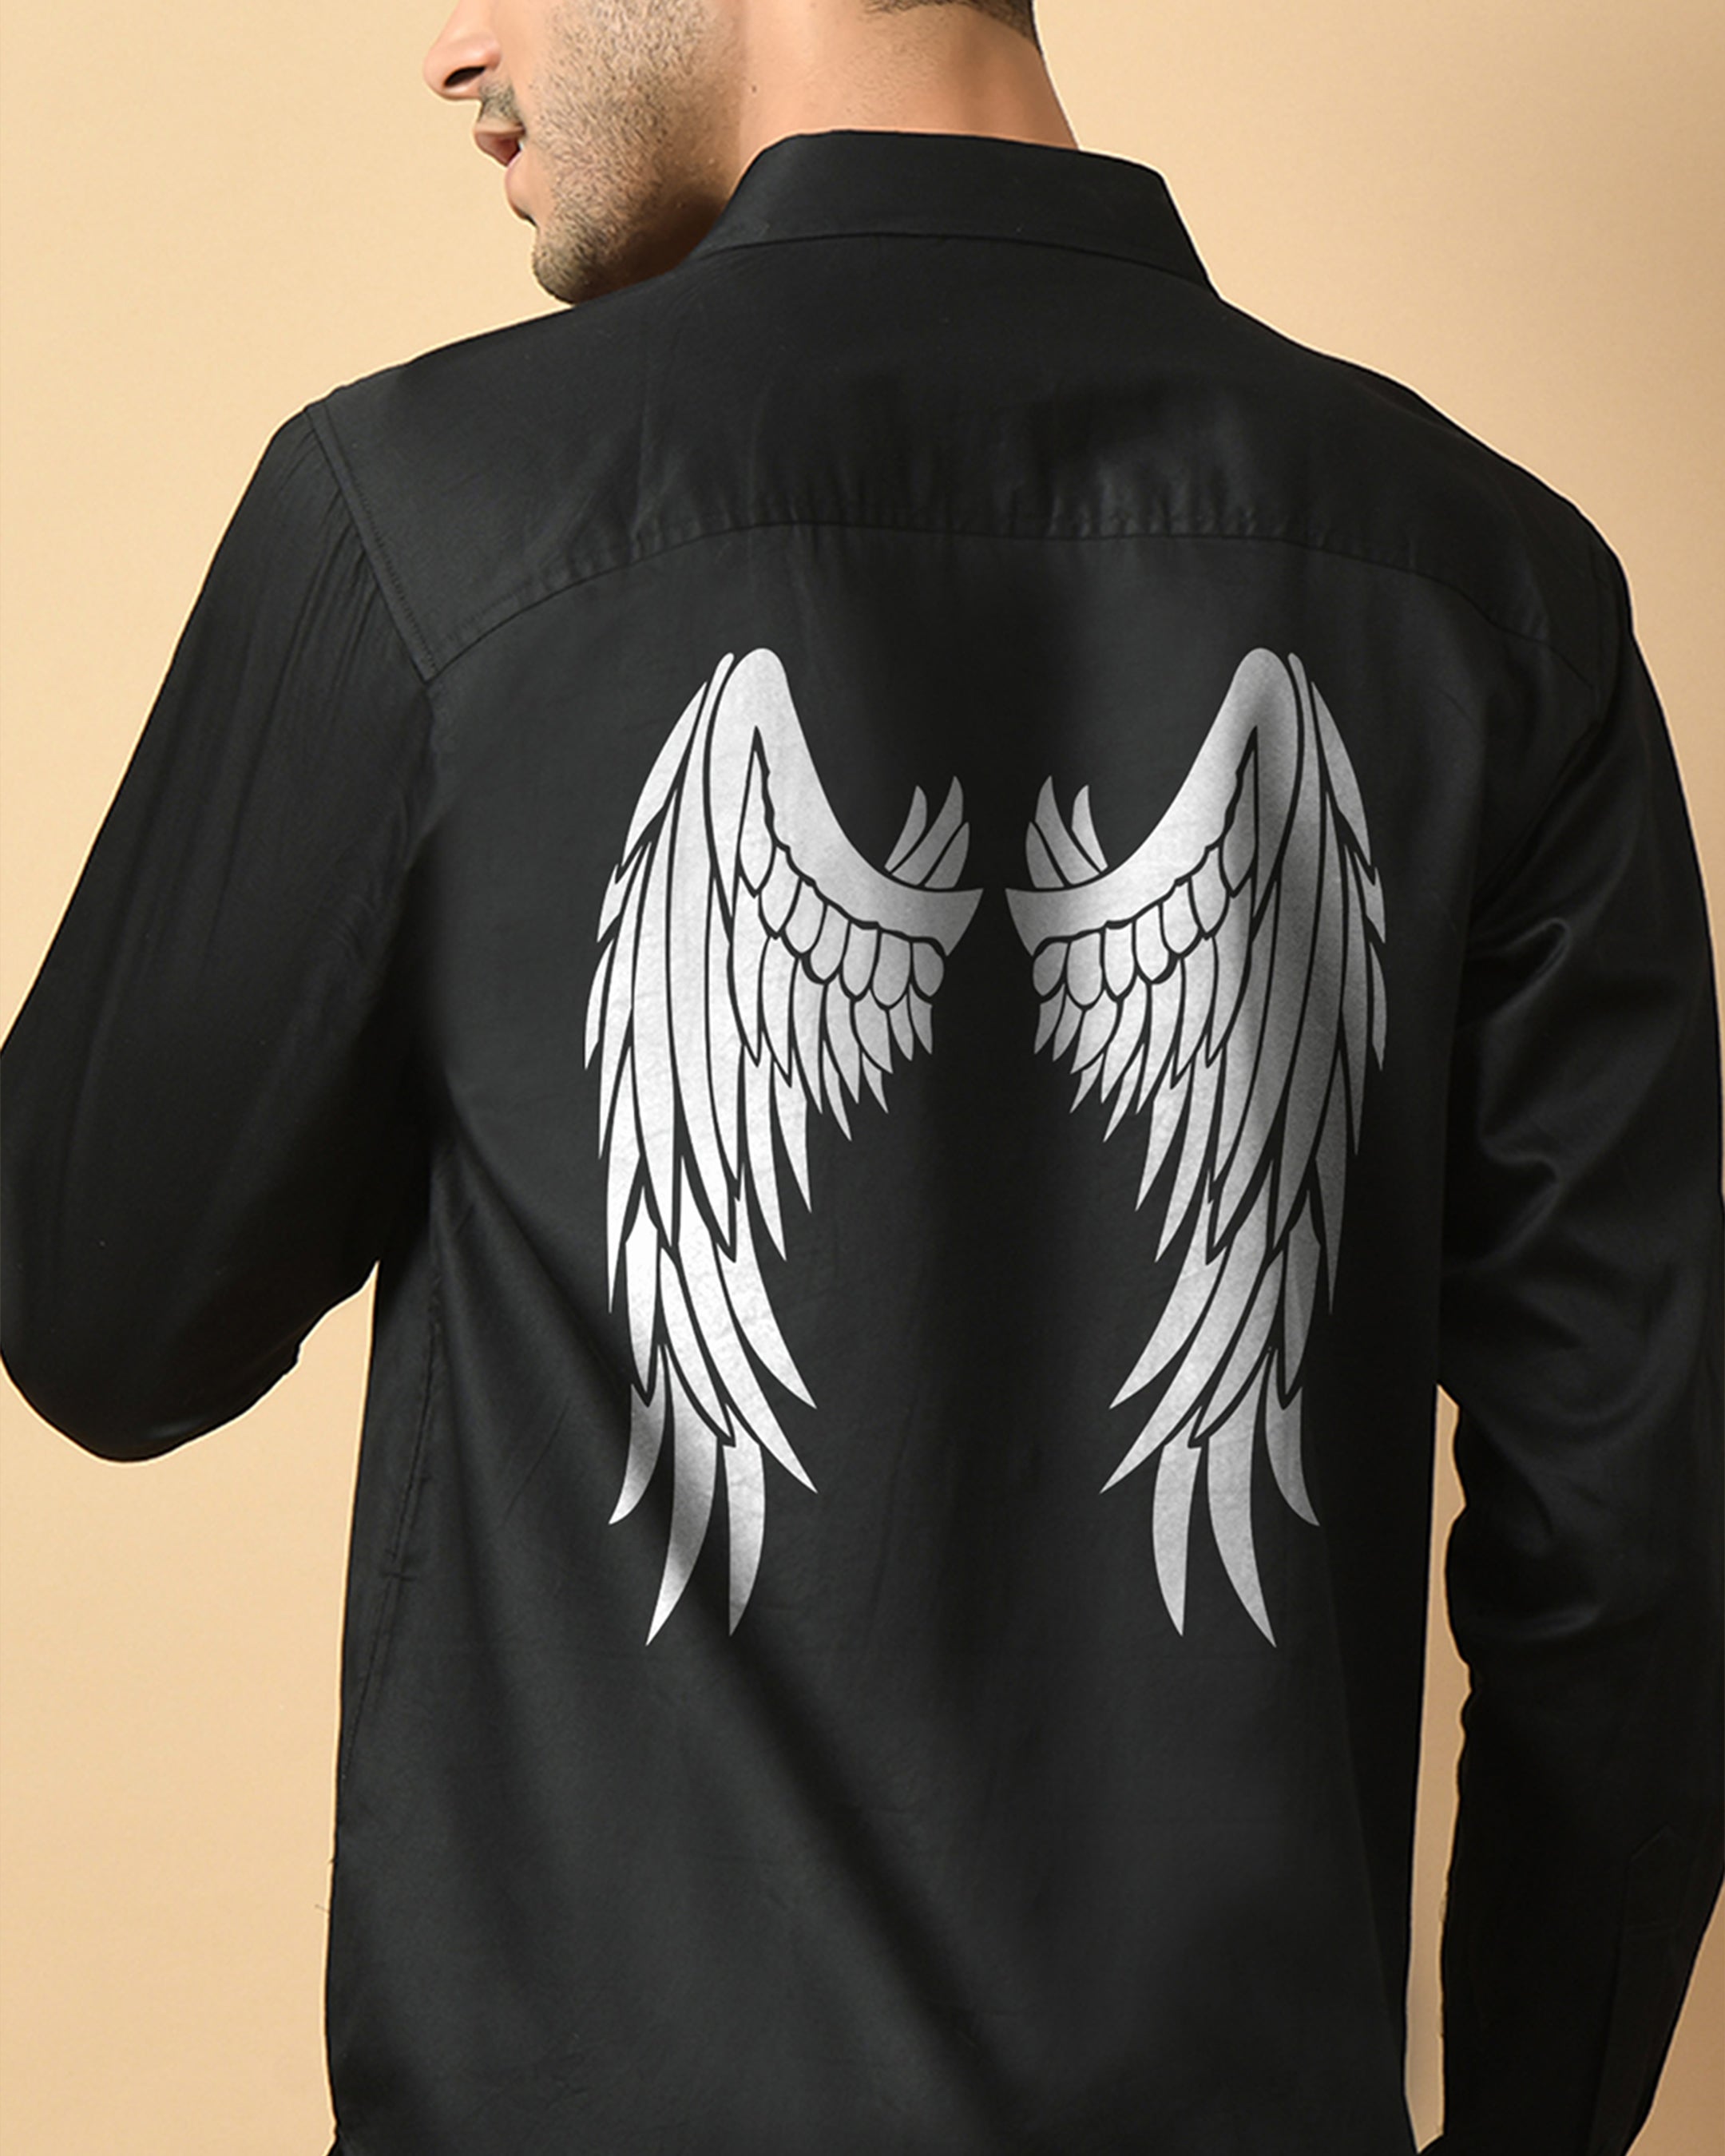 Wings Printed Black Shirt By Offmint